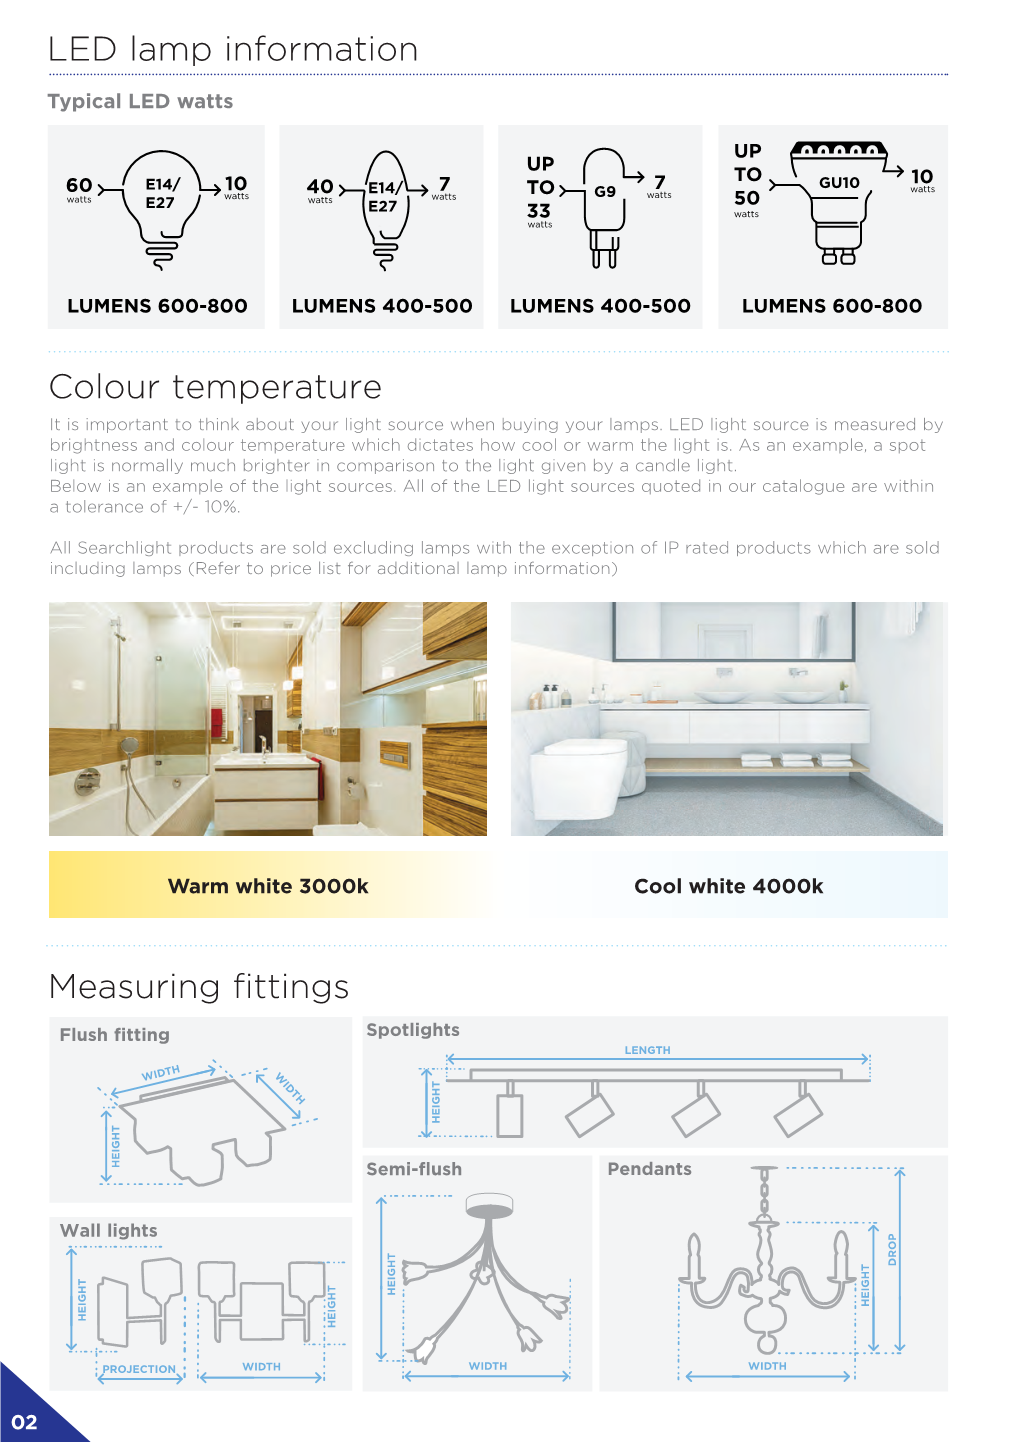 Colour Temperature Measuring Fittings LED Lamp Information